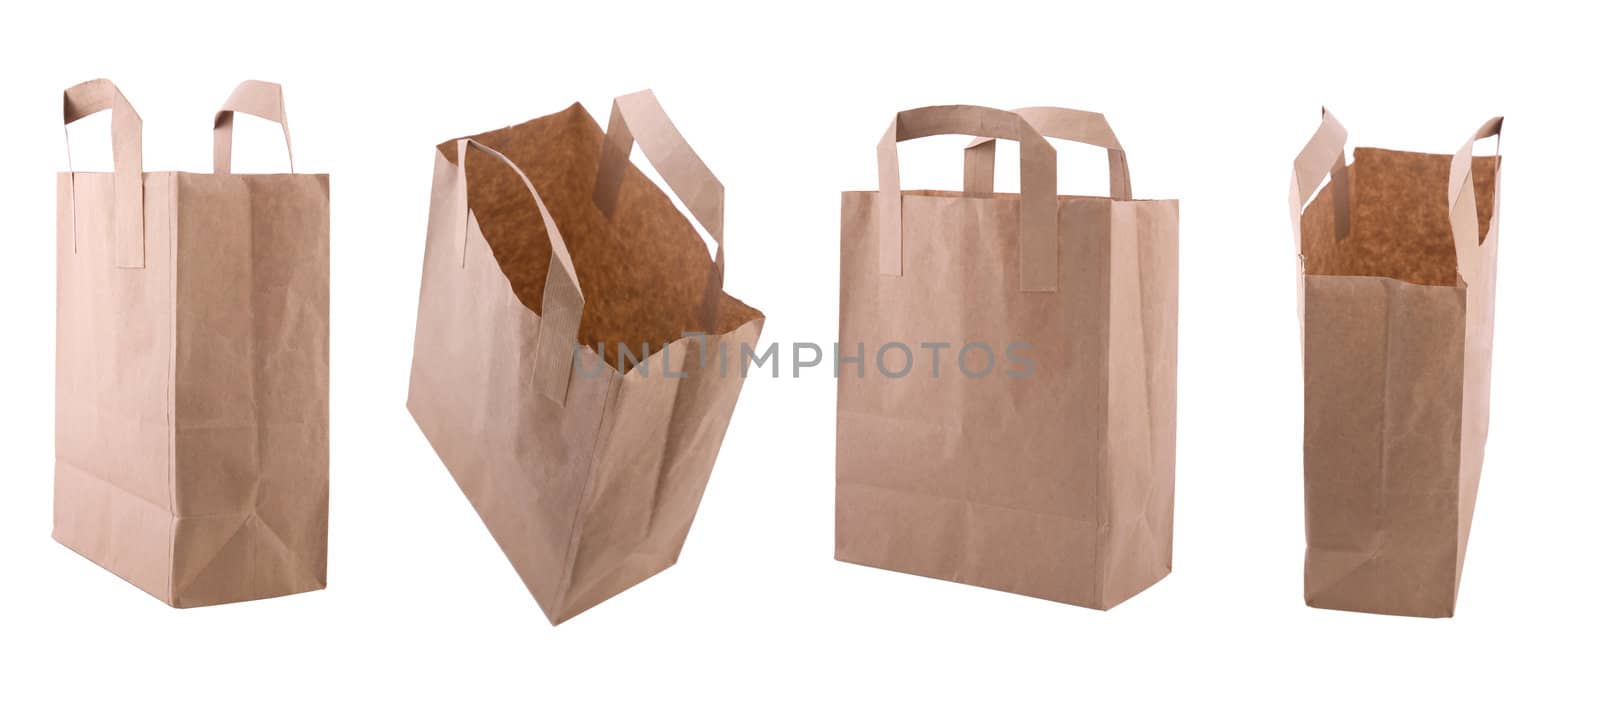 paper bag by VictorO